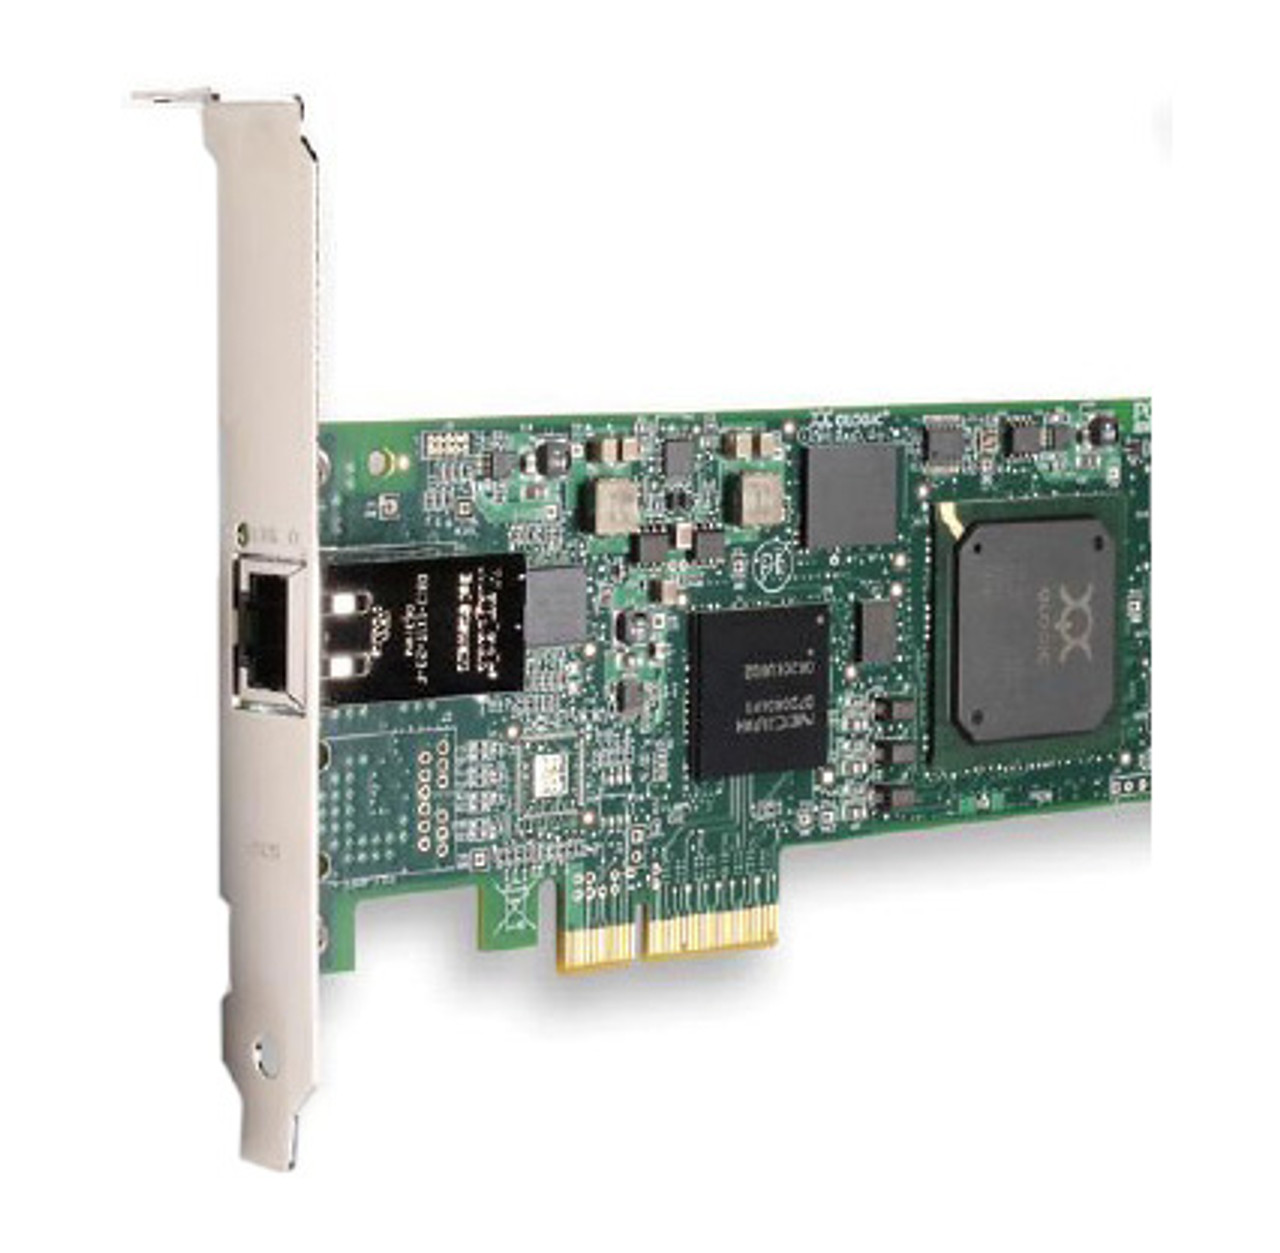 42C177008 IBM Dual-Ports iSCSI PCI Express x4 Host Bus Network Adapter by QLogic for System x3550 M2